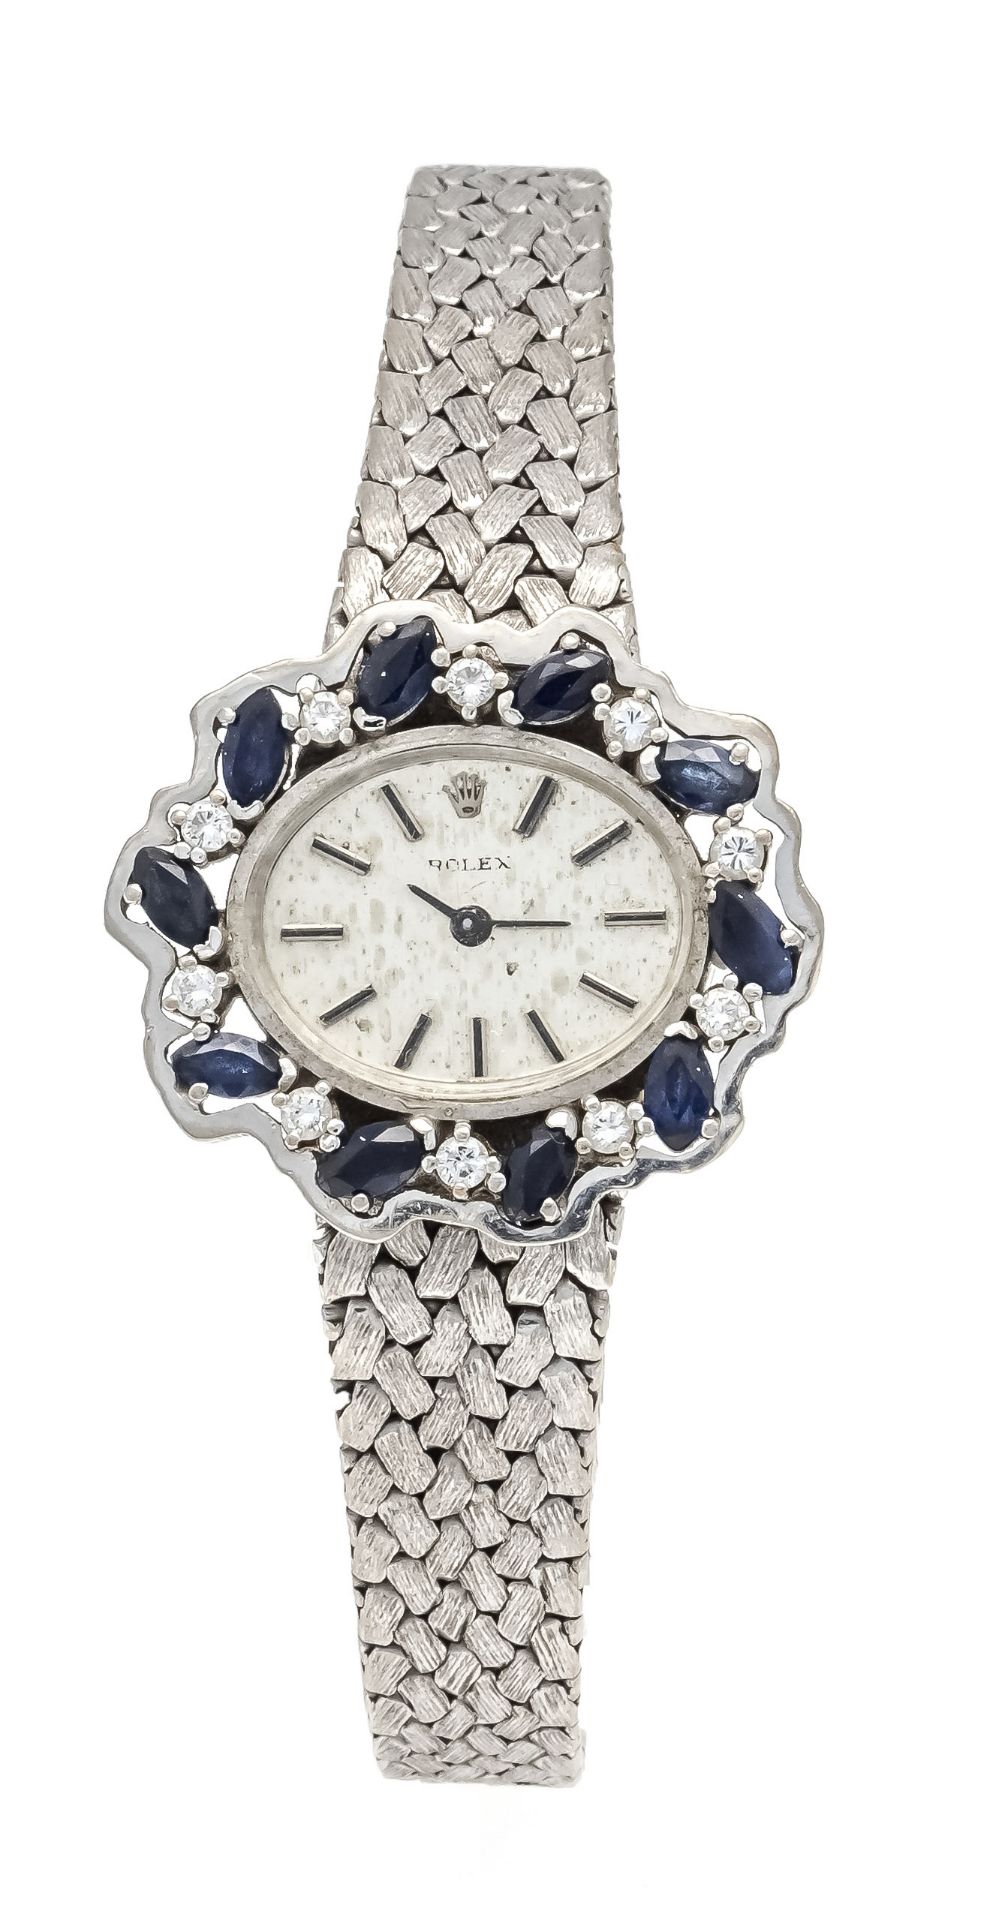 Rolex gold bracelet watch 750/000 WG, bezel with brilliant-cut diamond and sapphire in prong